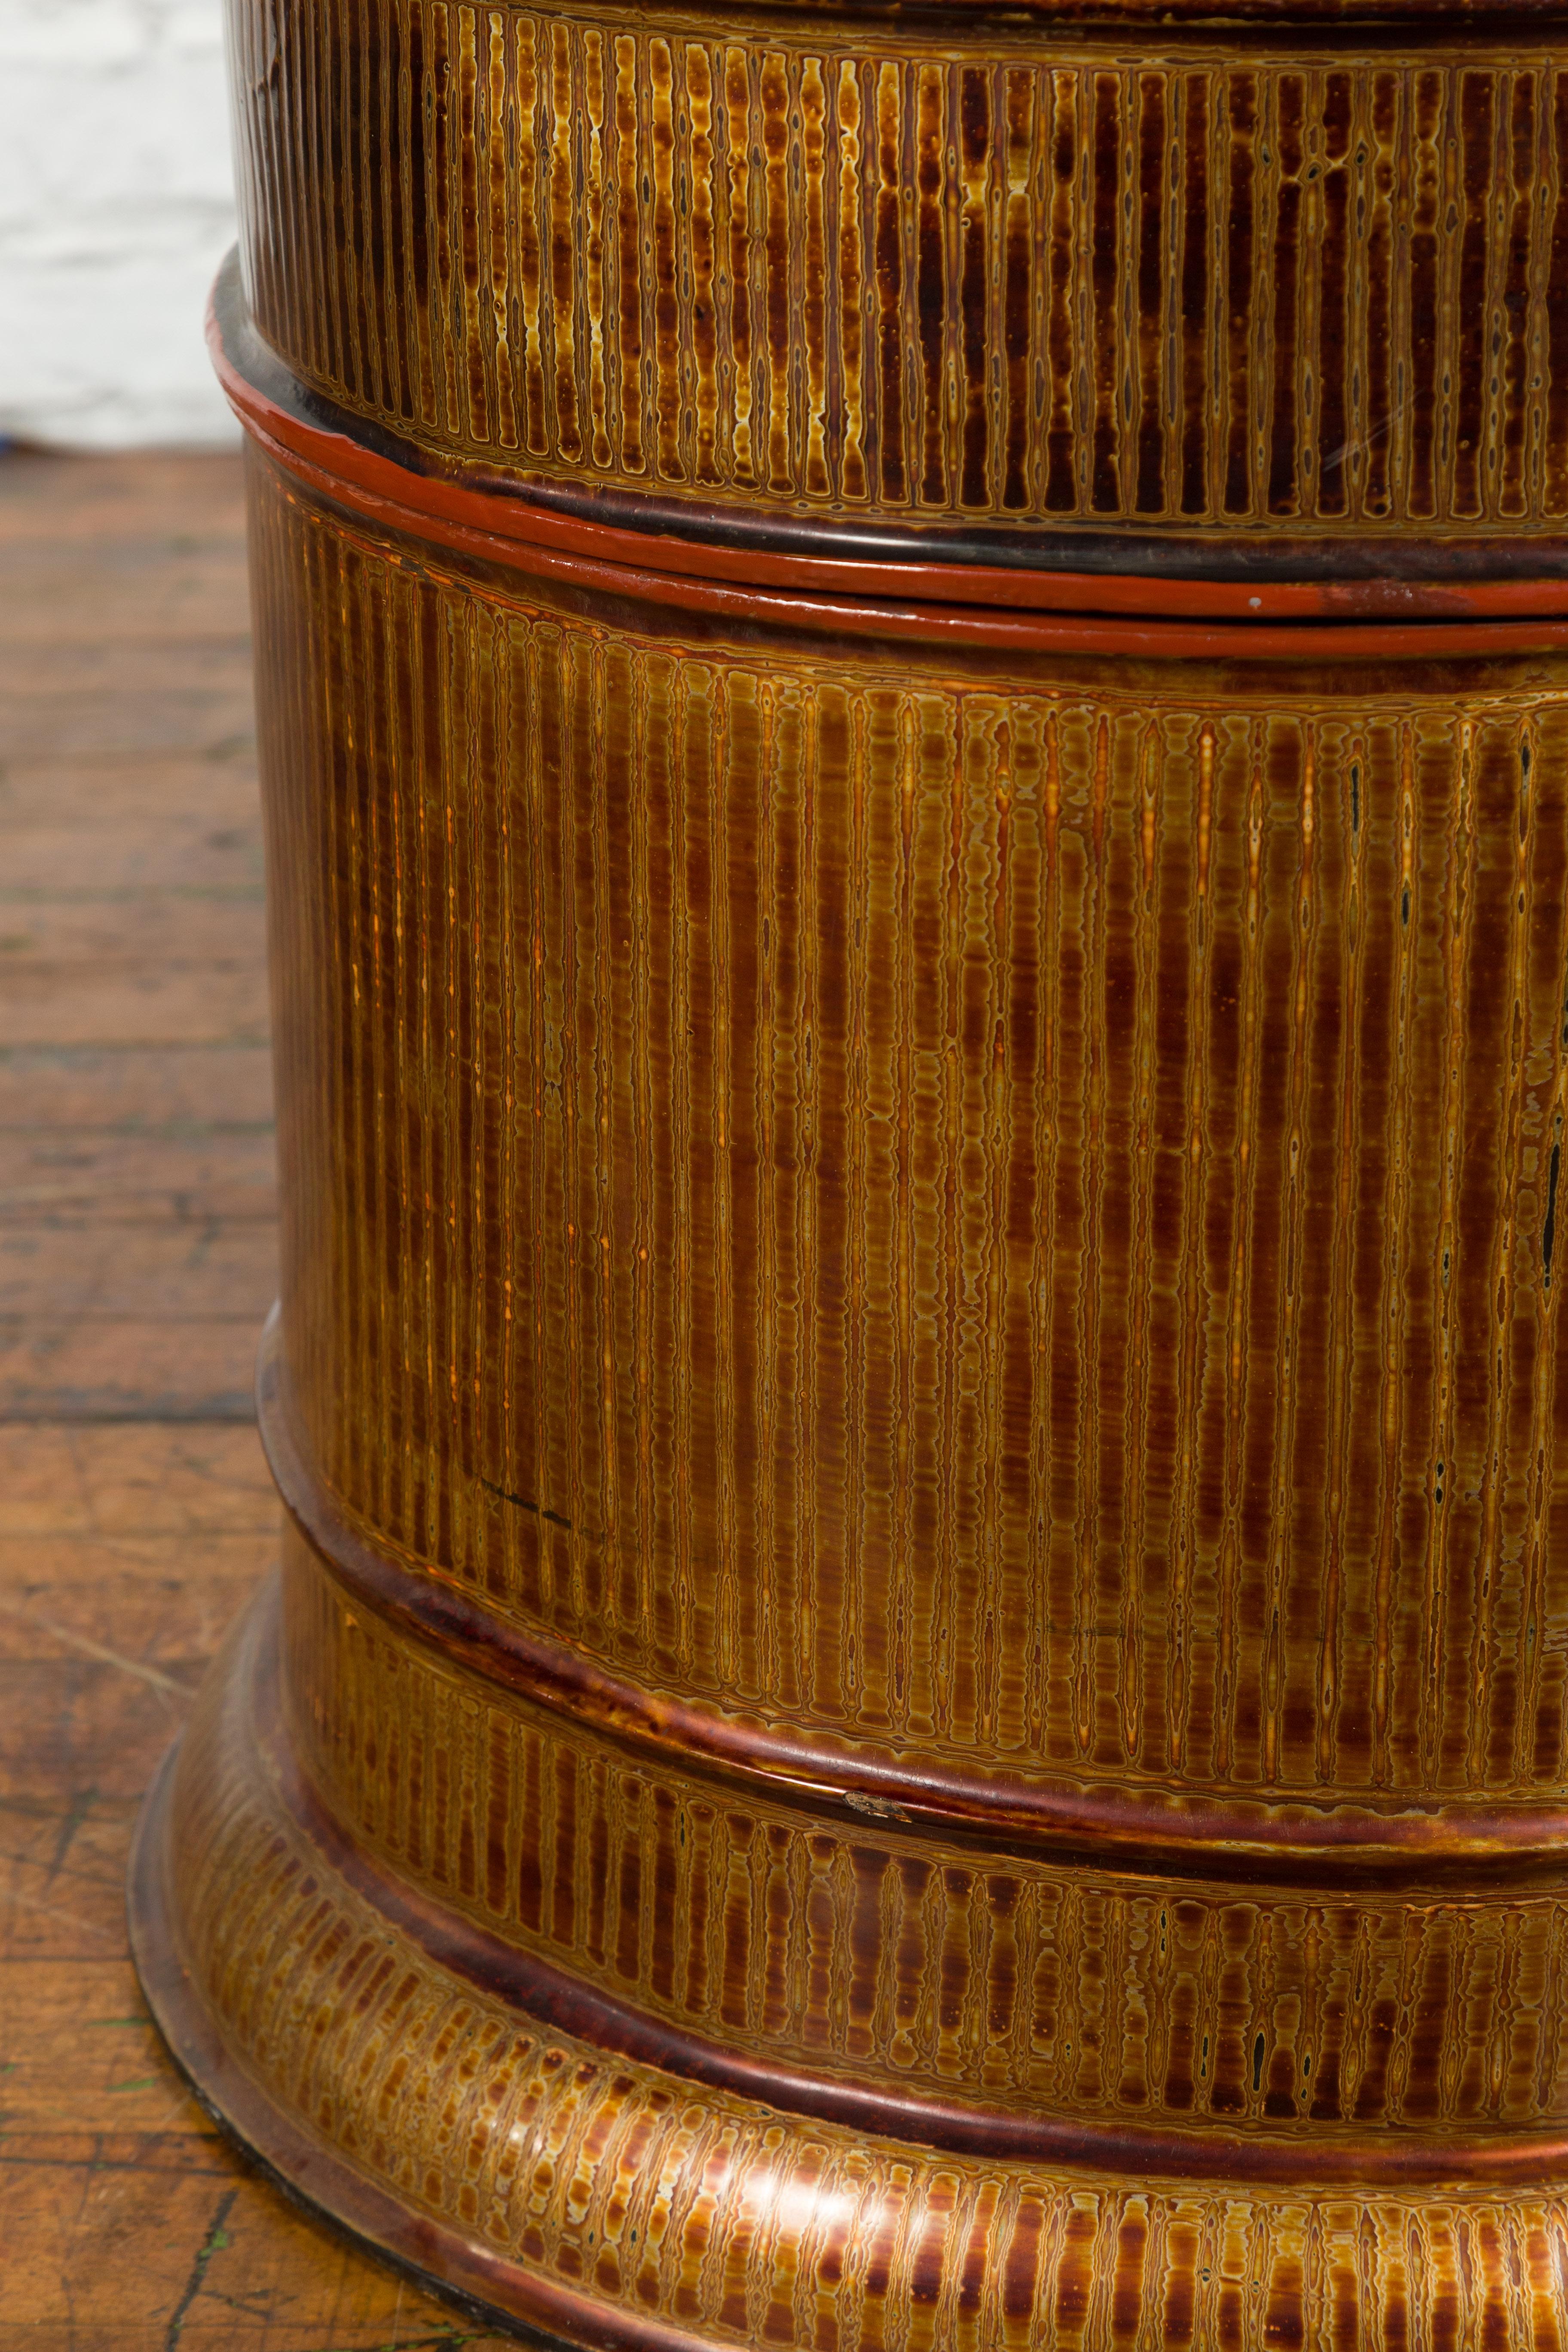 Burmese Vintage Negora Lacquer Circular Storage Bin with Vertical Stripes For Sale 4